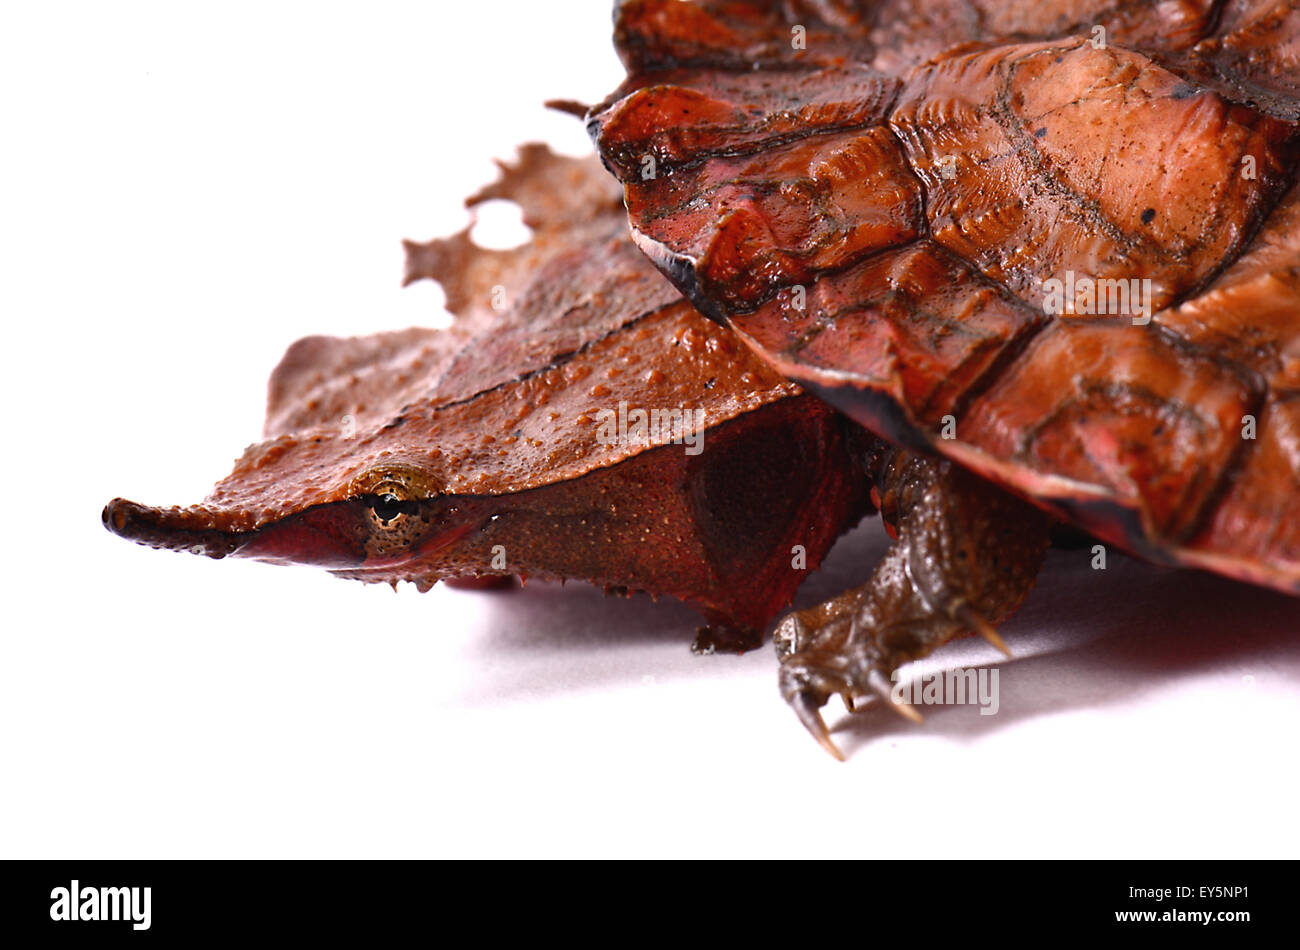 Portrait of young Matamata Turtle on white background - Park Turtles 'A Cupulatta' -  - Stock Photo